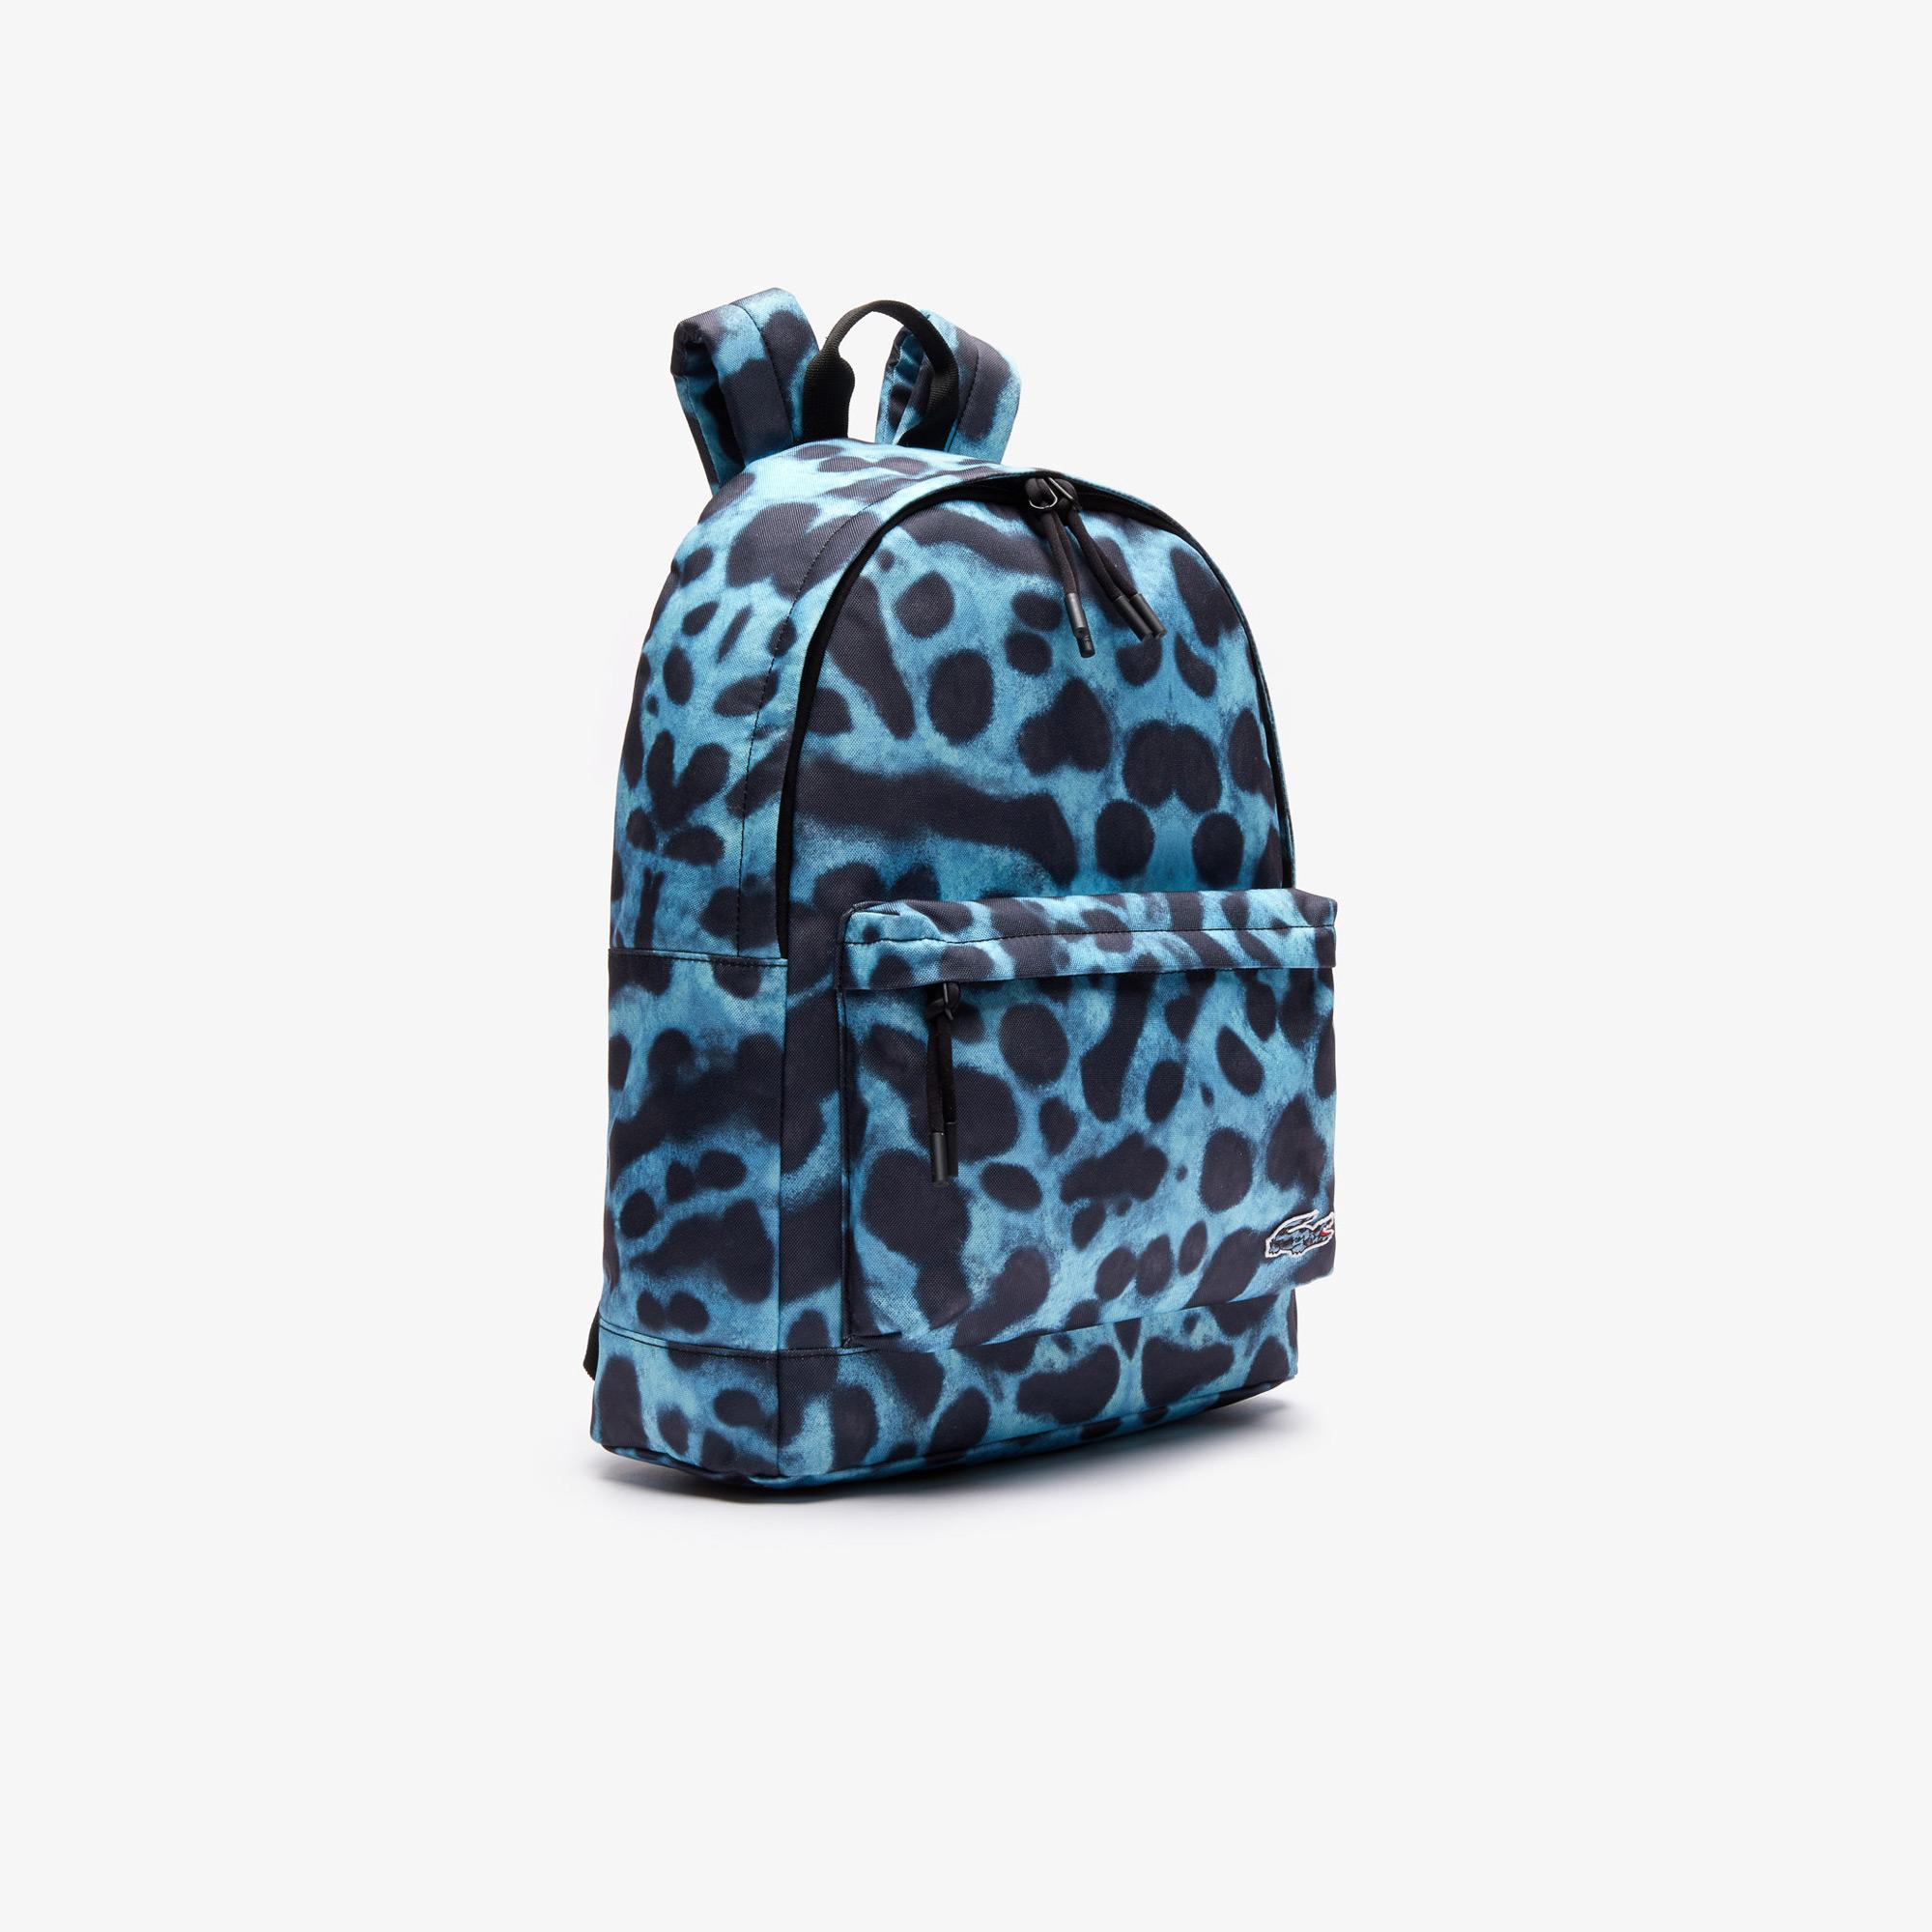 Lacoste Men's x National Geographic Animal Print Backpack NH3344XM 